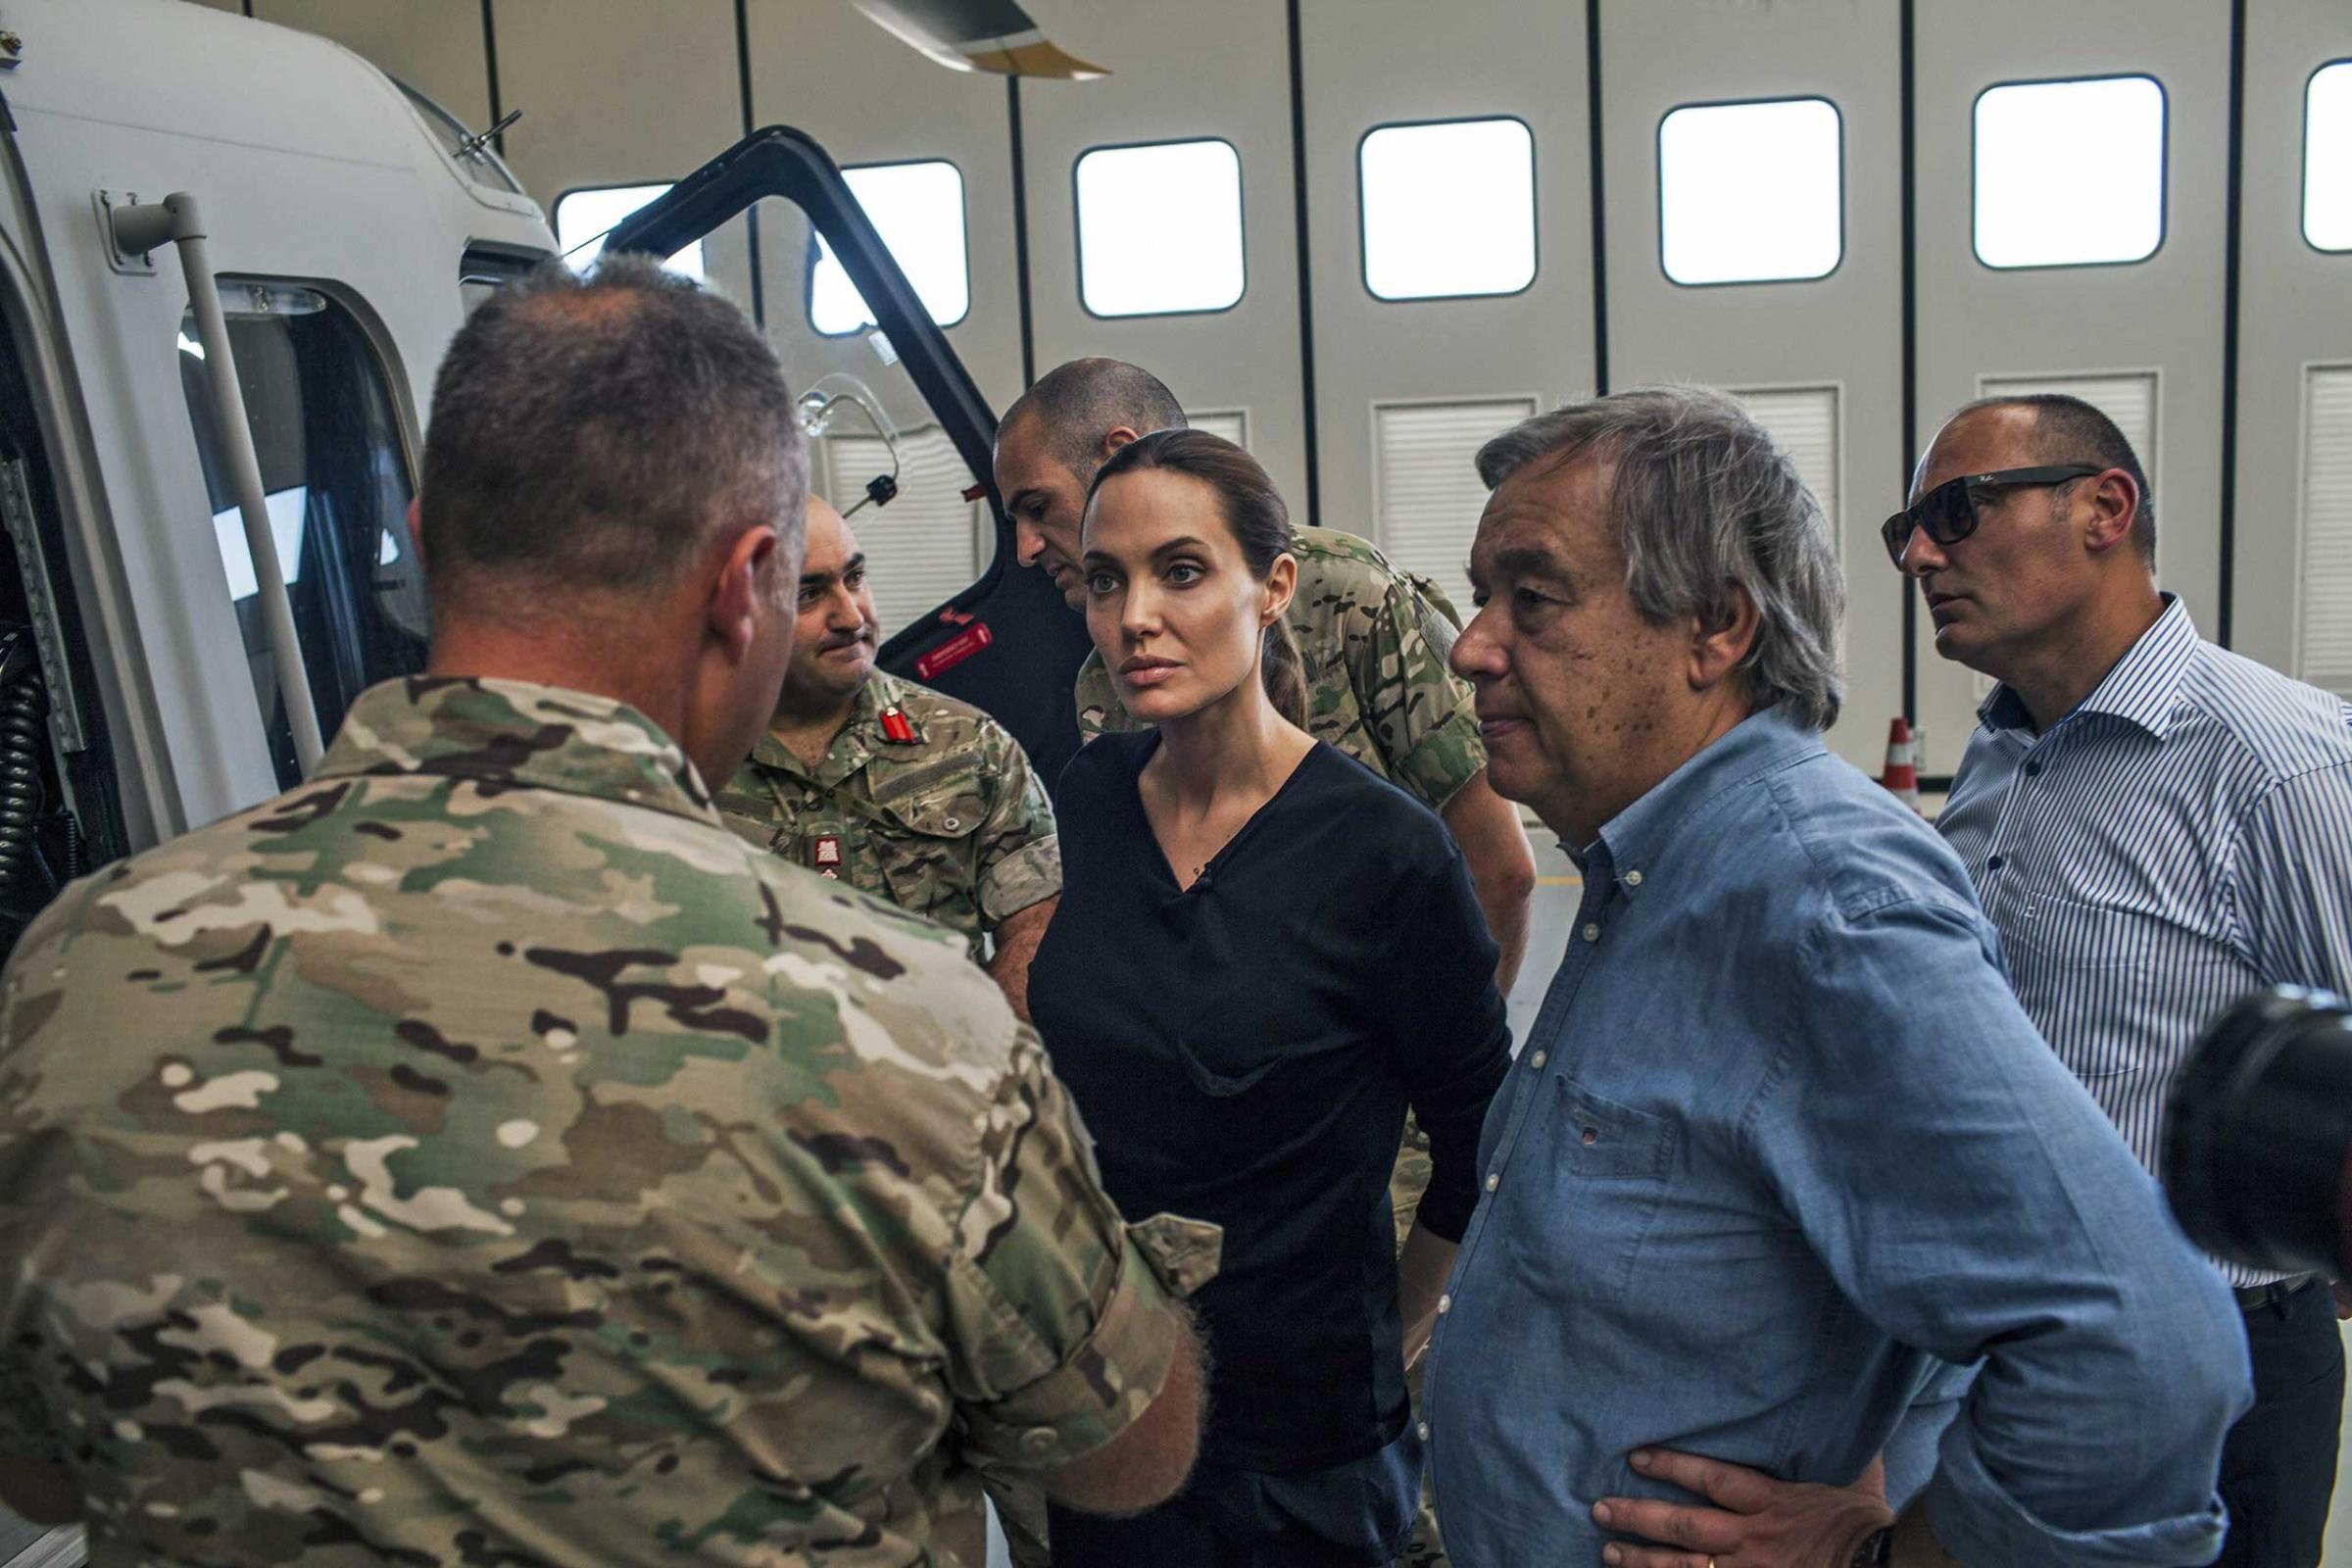 Angelina Jolie. in her role as the United Nations High Commissioner for Refugees Special Envoy, listening to Maltese military officers discussing rescue at sea operations for refugees at a military base in Valetta, Malta, Sept. 14, 2014.